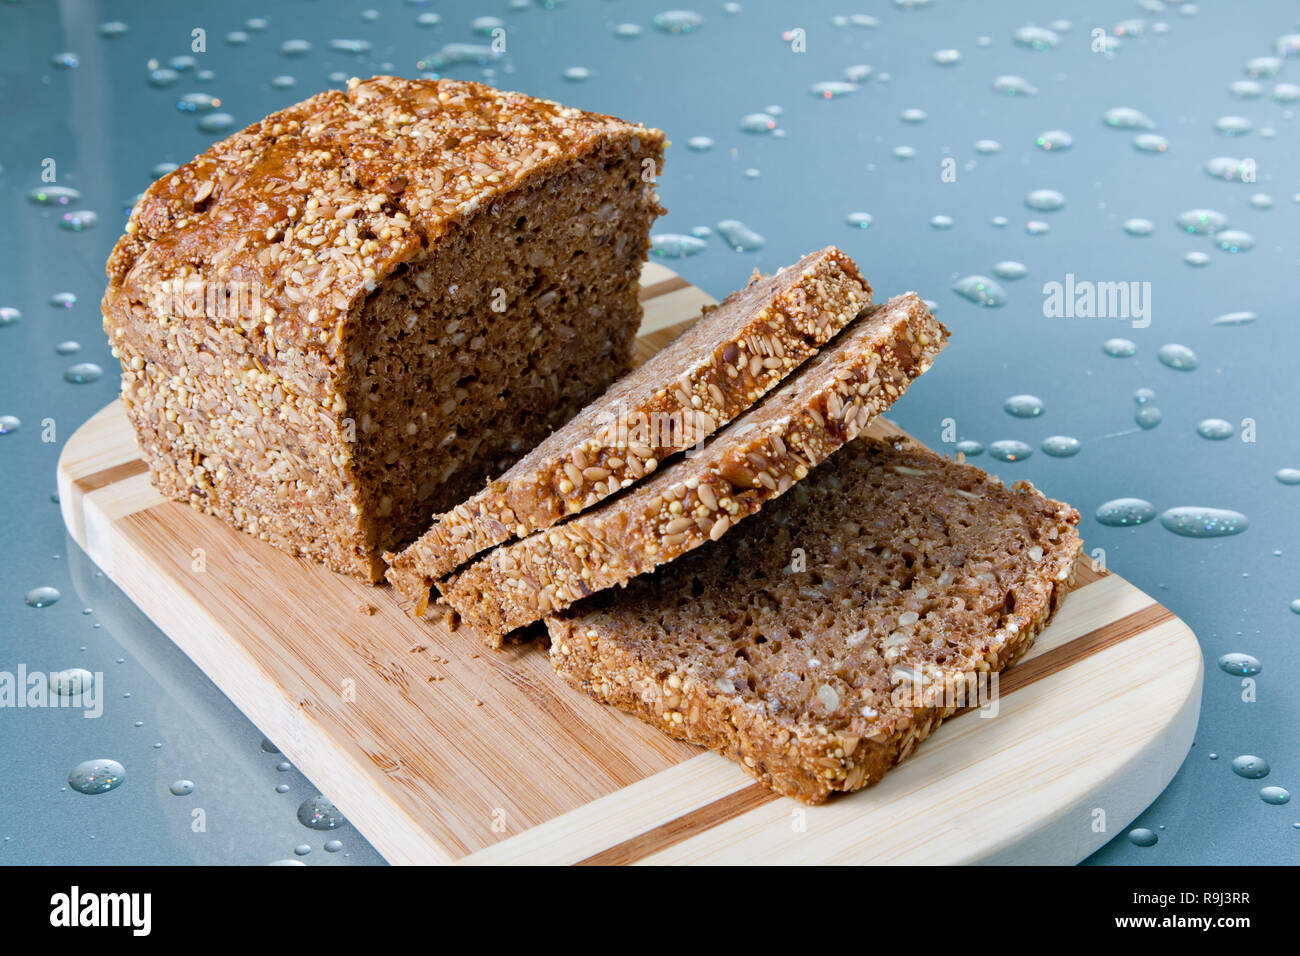 Loaf of wholegrain bread and slices on wooden cutting board. Healthy food Stock Photo